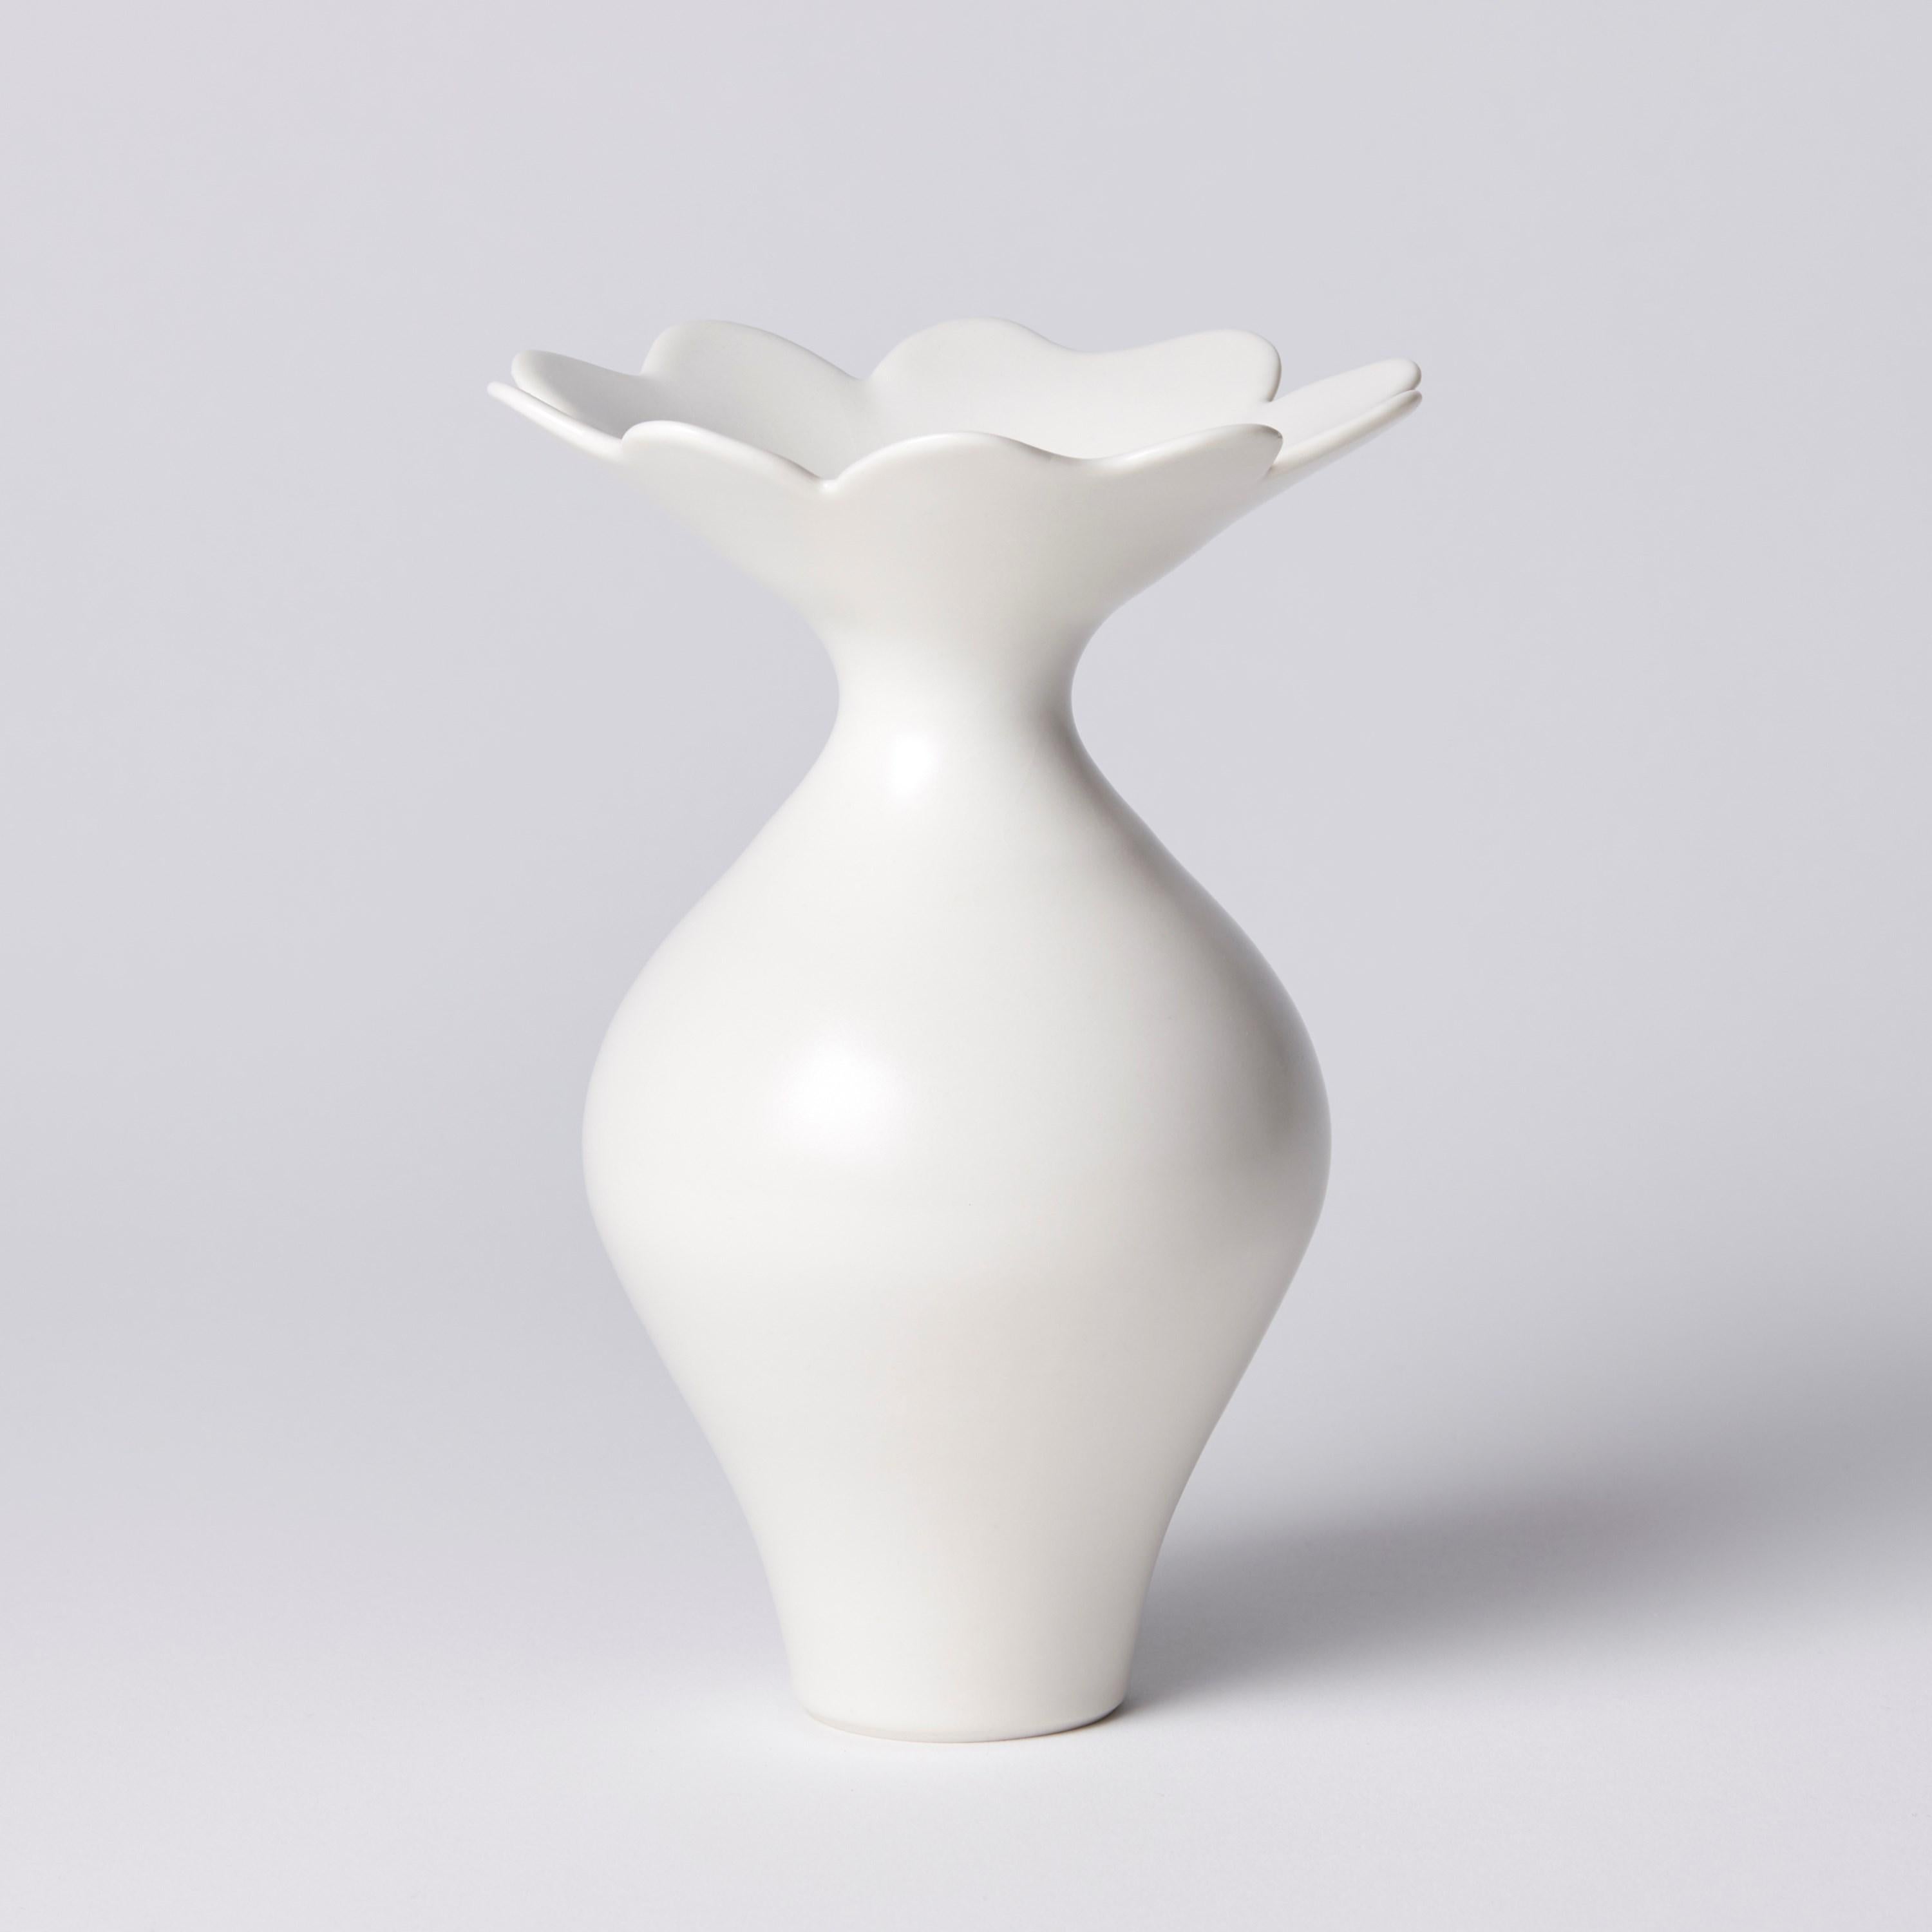 ‘Vase with Foliate Rim II' is a unique porcelain sculptural vessel by the British artist, Vivienne Foley. 

Vivienne Foley is based in Gloucestershire where she produces exquisite ceramic sculpture. Although in essence they are often functional